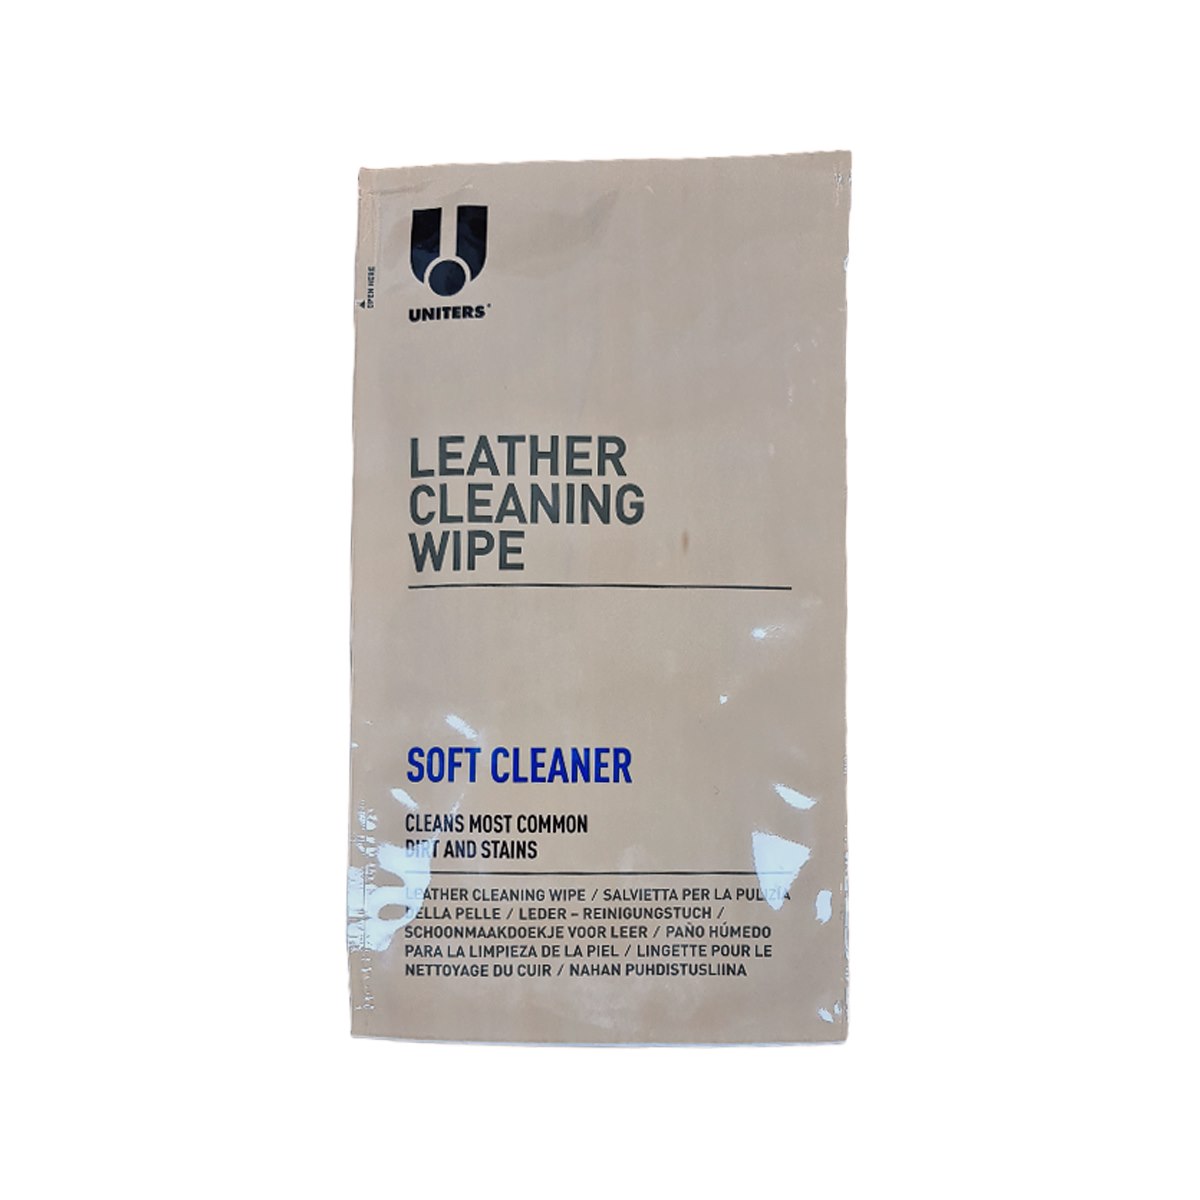 Pure Spa Uniters Leather Soft Cleaner Cleaning Wipe